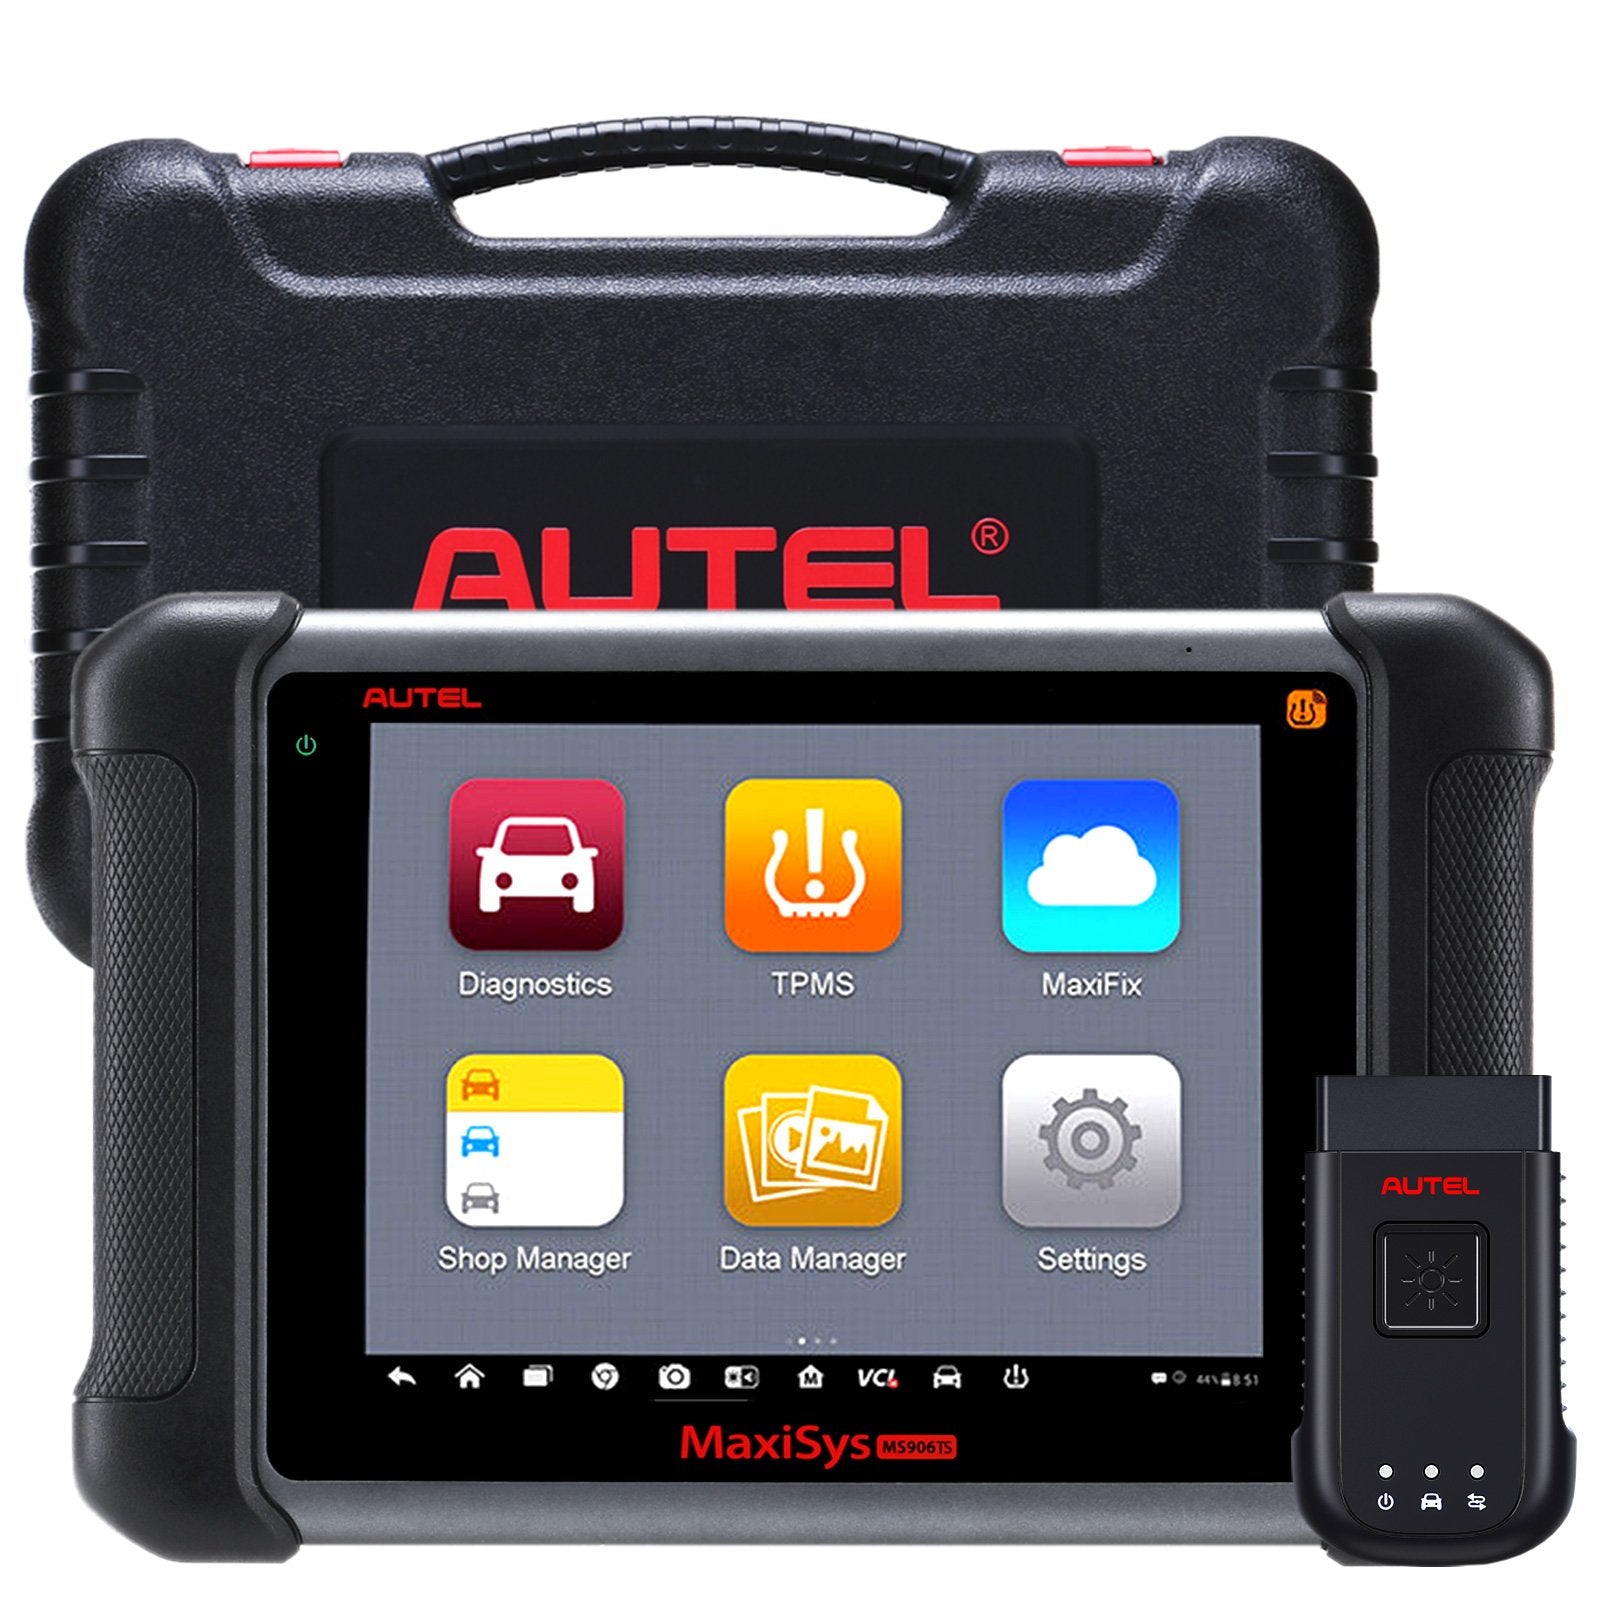 AUTEL MaxiSYS MS906TS Car Diagnostic Tool Free Gift –